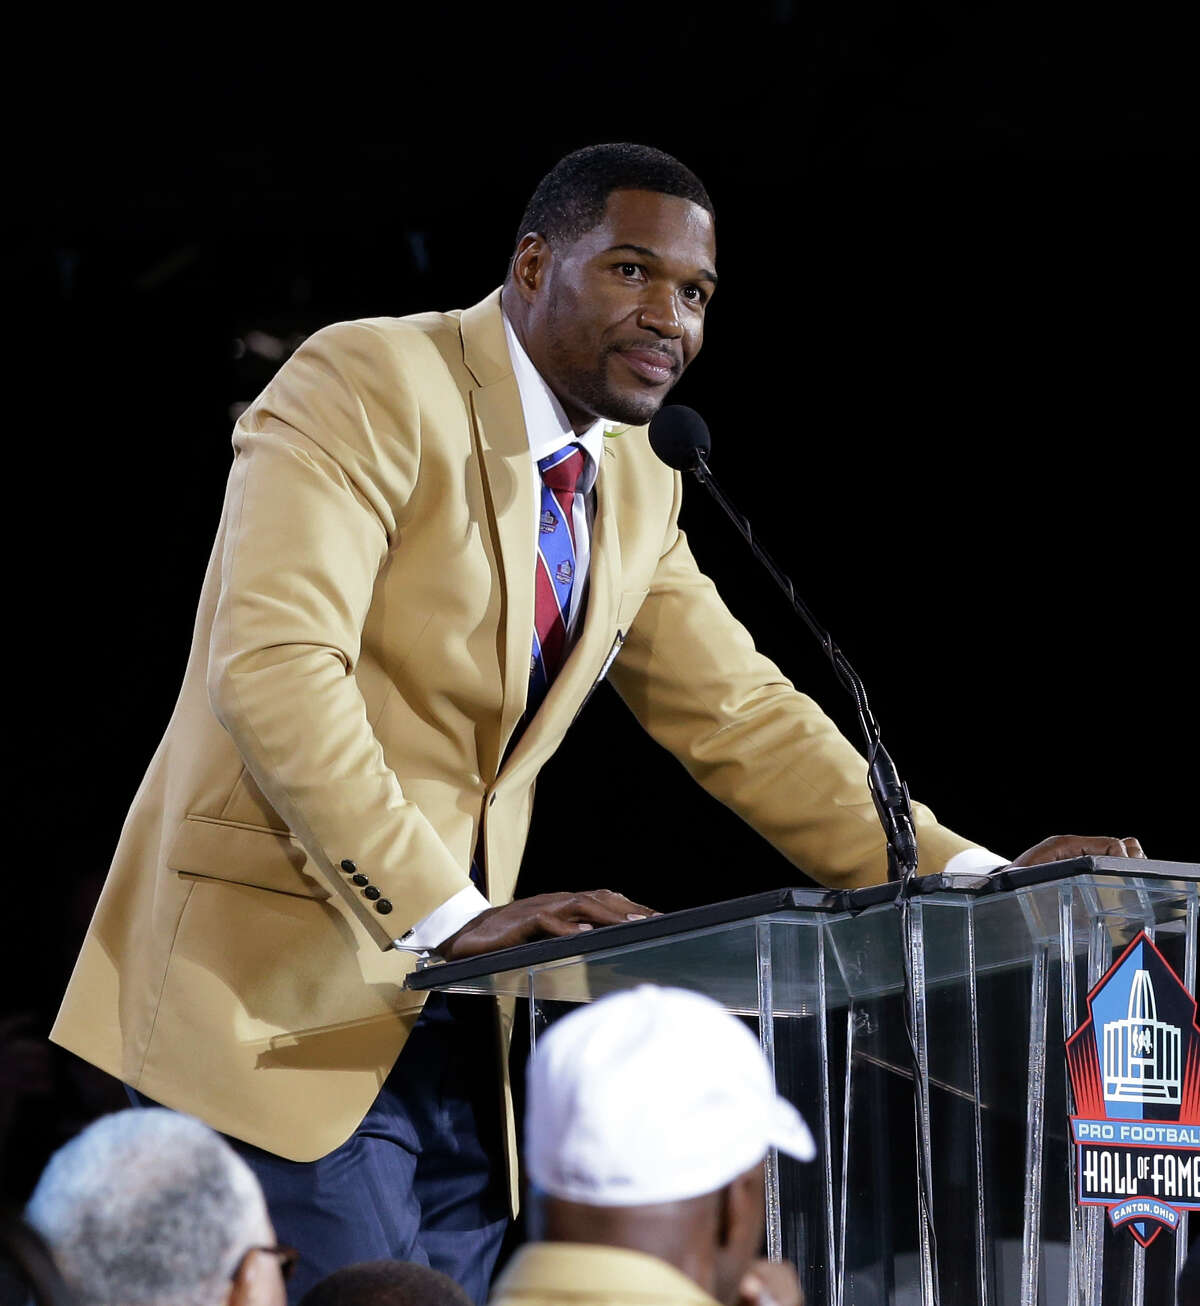 Hall of Fame inductee Michael Strahan said Saturday night during his speech that he was proud to have played for Texas Southern University and to have been a part of the Southwestern Athletic Conference.